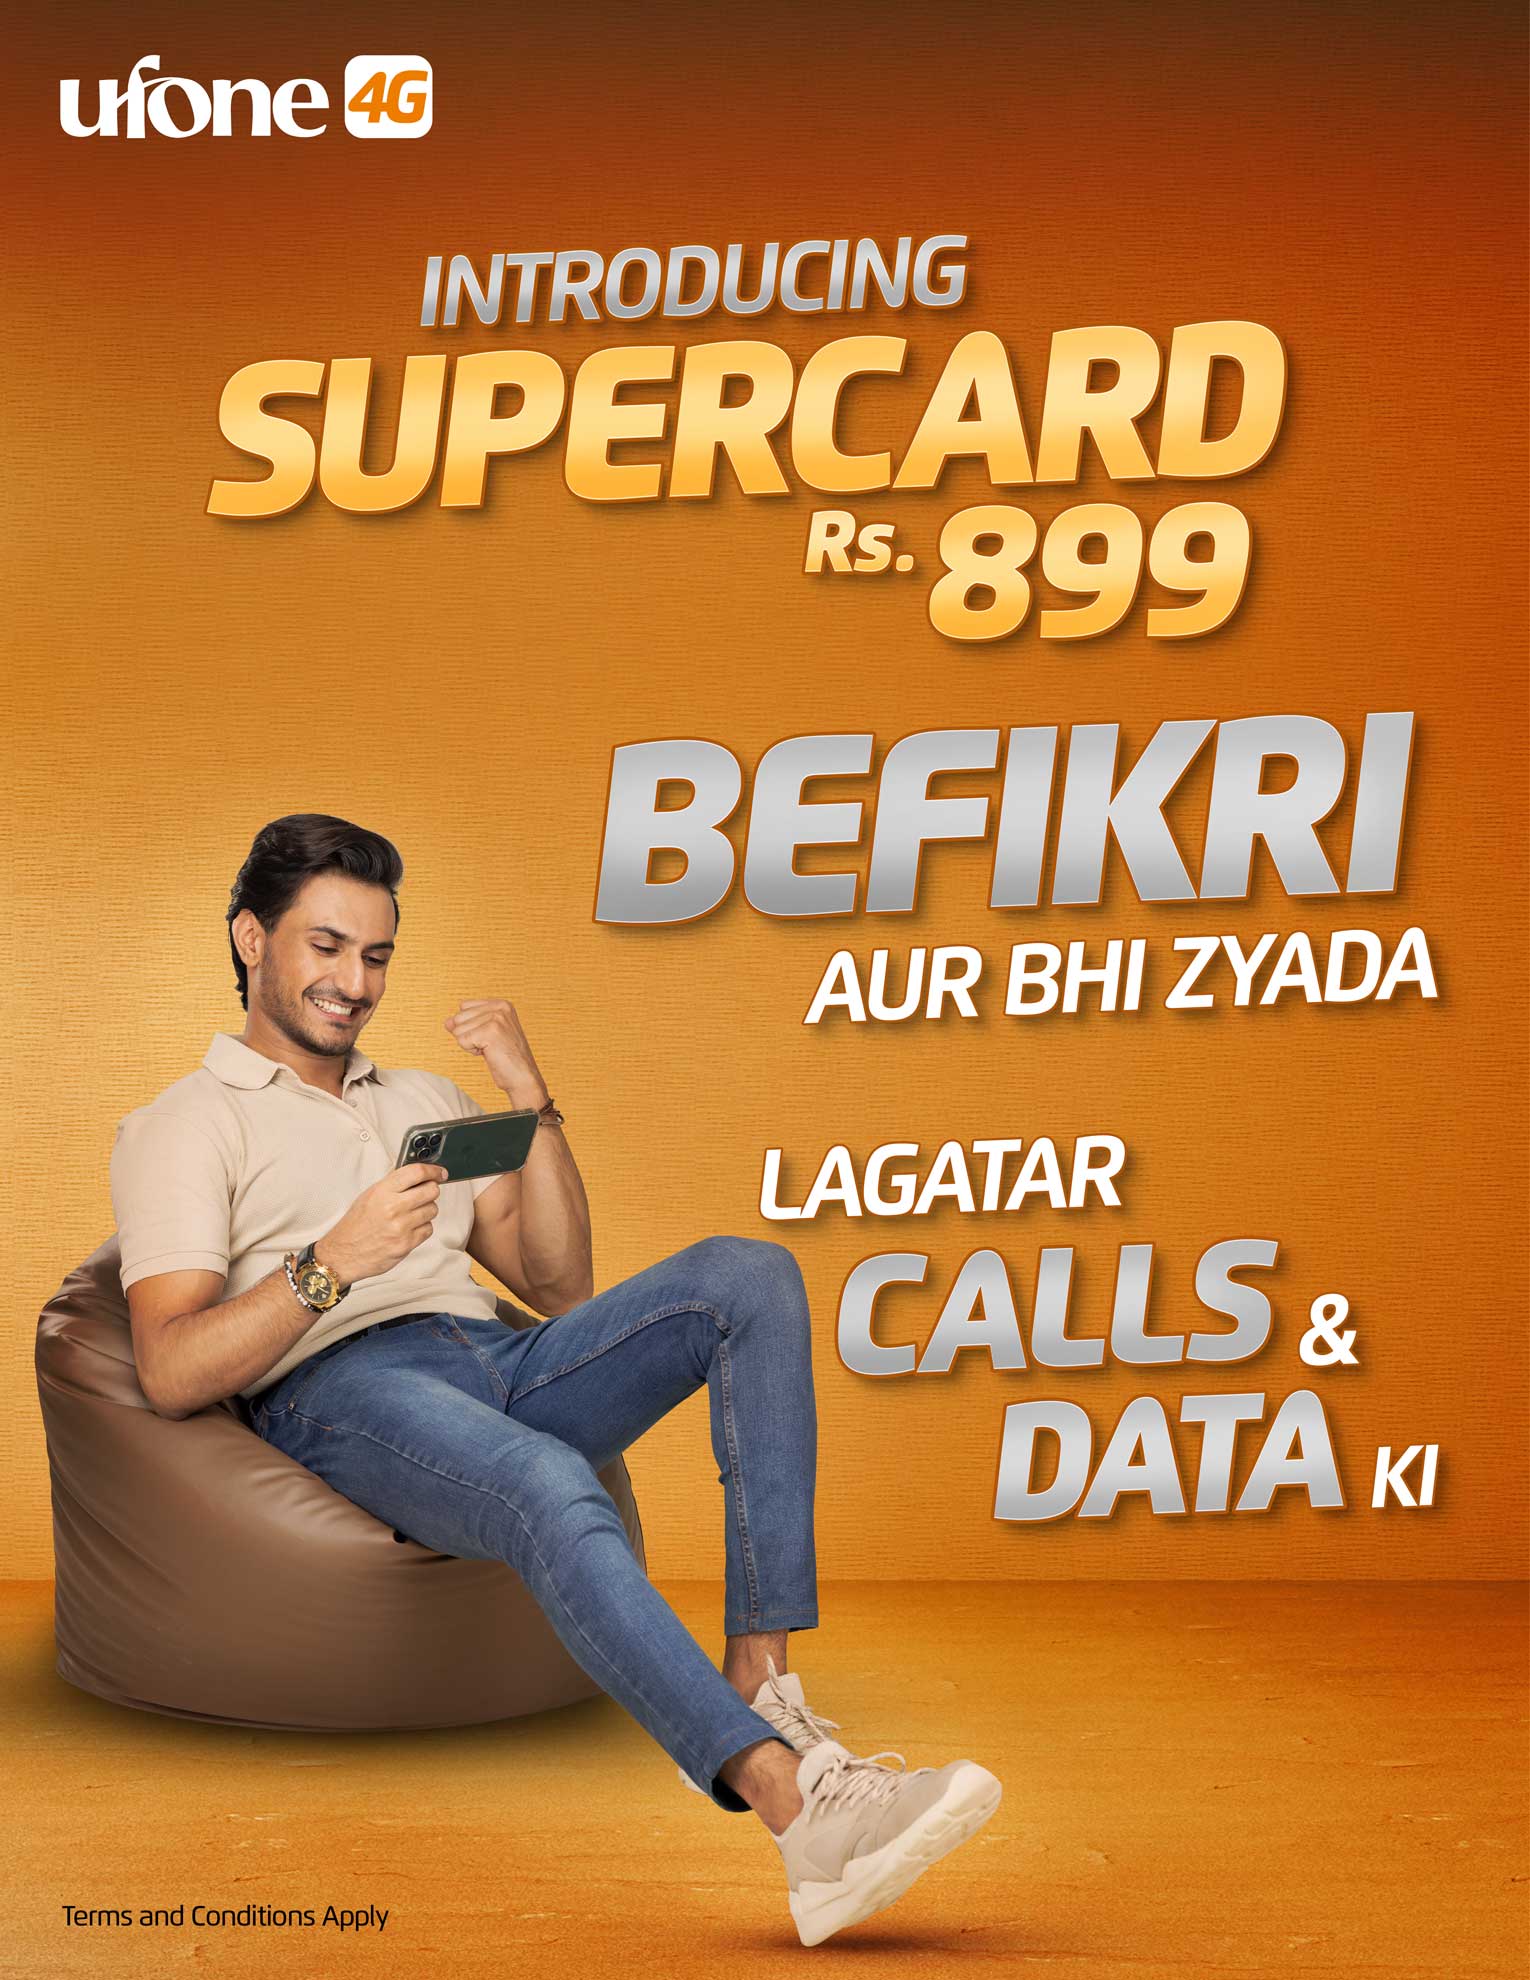 Ufone 4G launches Super Card 899 for Nonstop Connectivity and Unlimited Calls